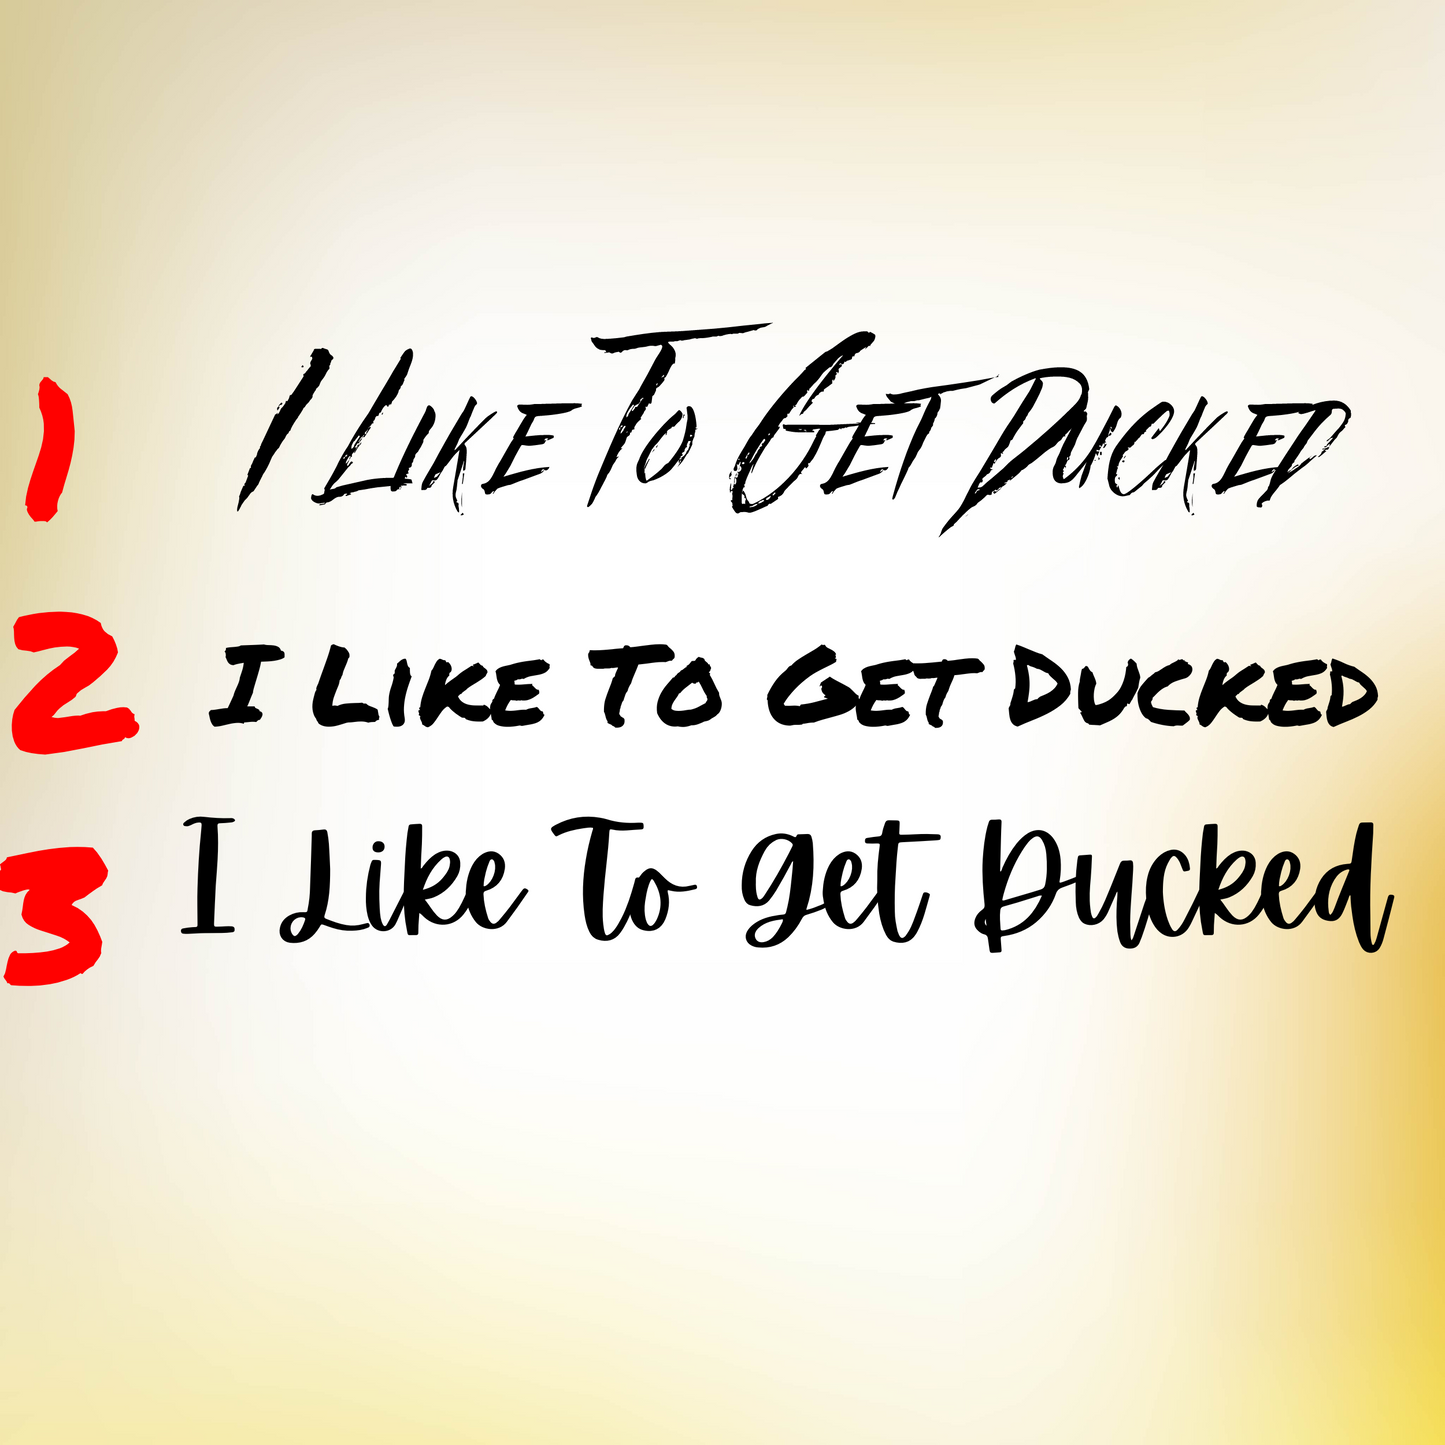 I Like To Get Ducked